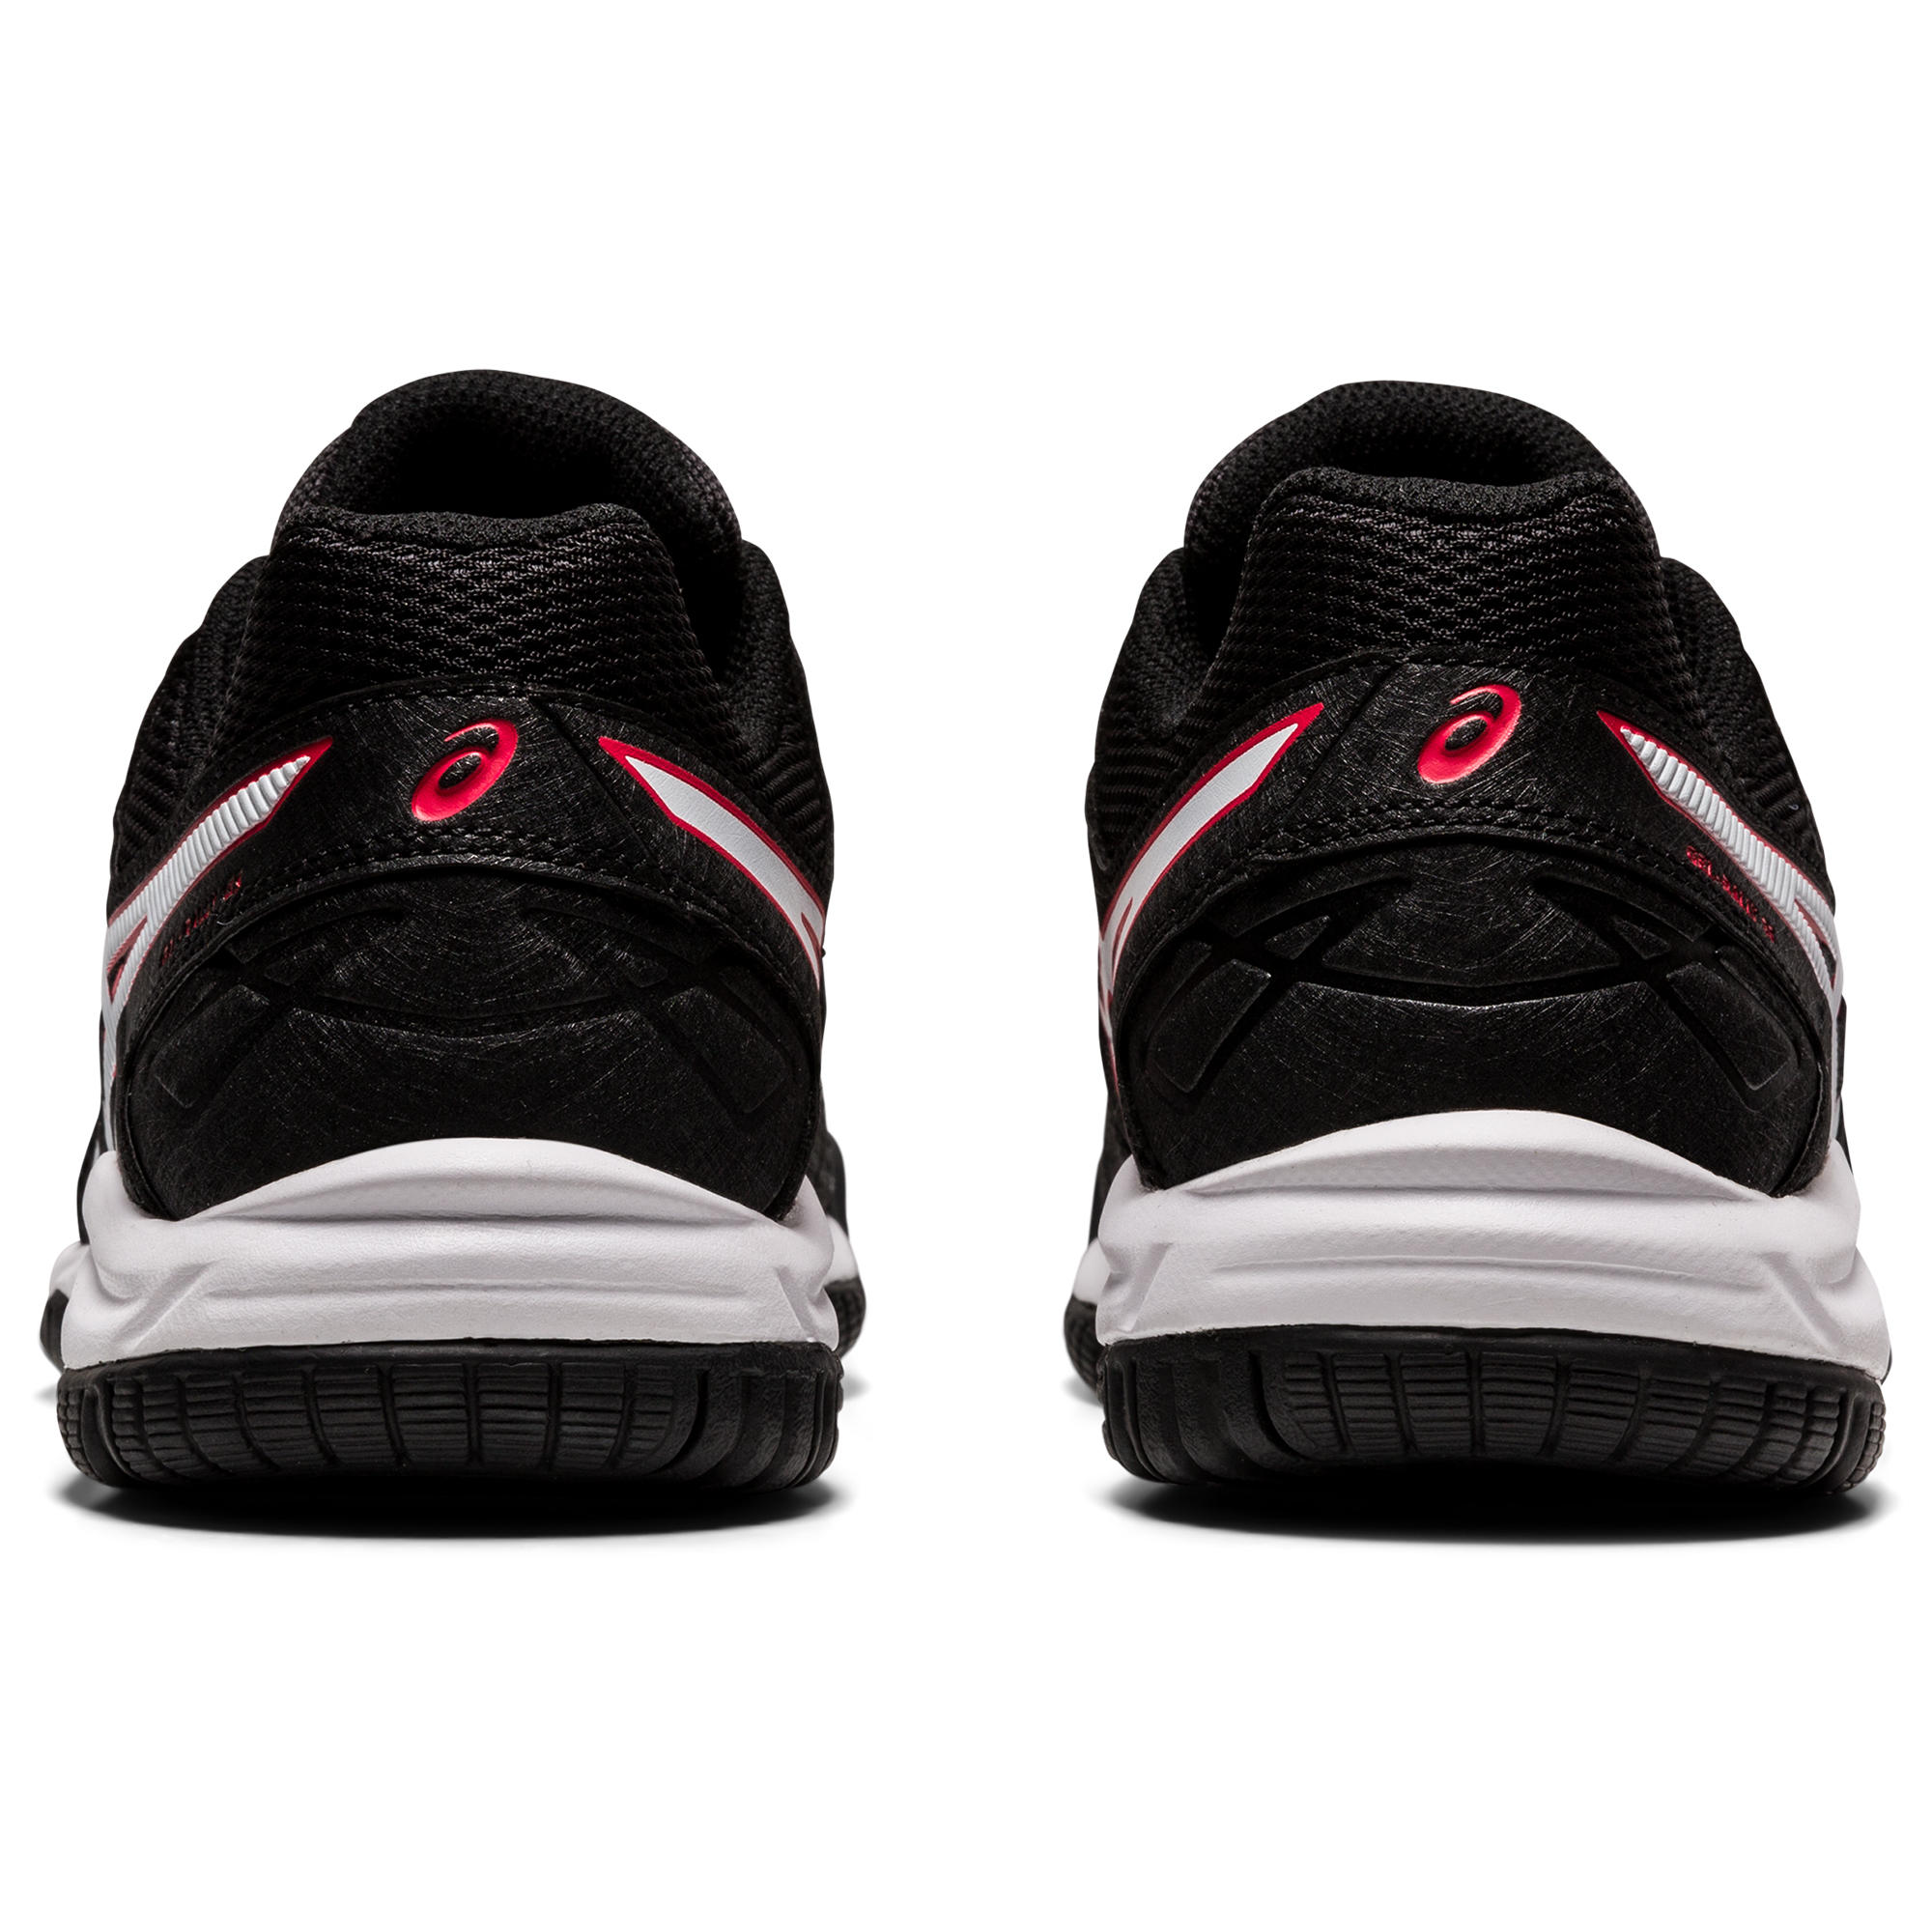 Kids' Tennis Shoes Rally - Black/Red 6/6